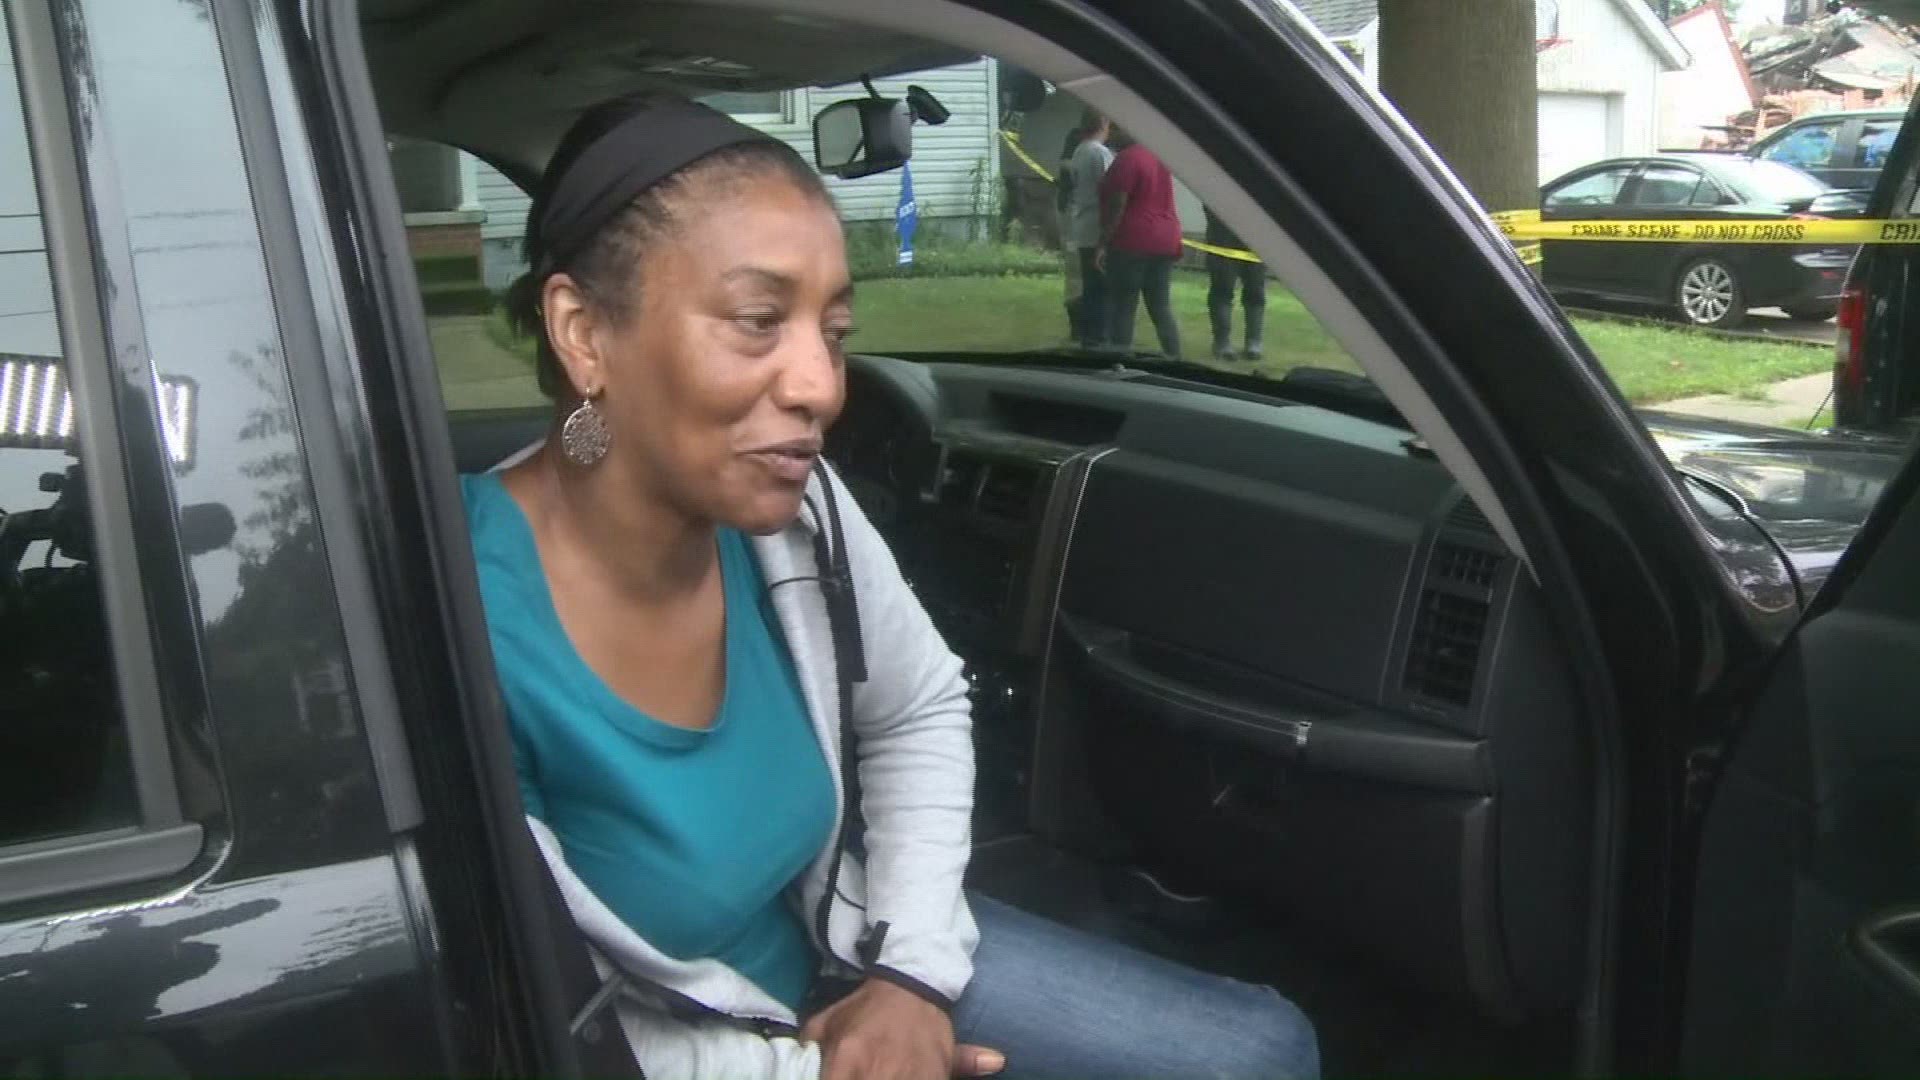 A homeowner discusses the aftermath of a house explosion in Wayne County. A Swastika and racial slurs were painted on her property, and authorities are investigating the scene as a hate crime.